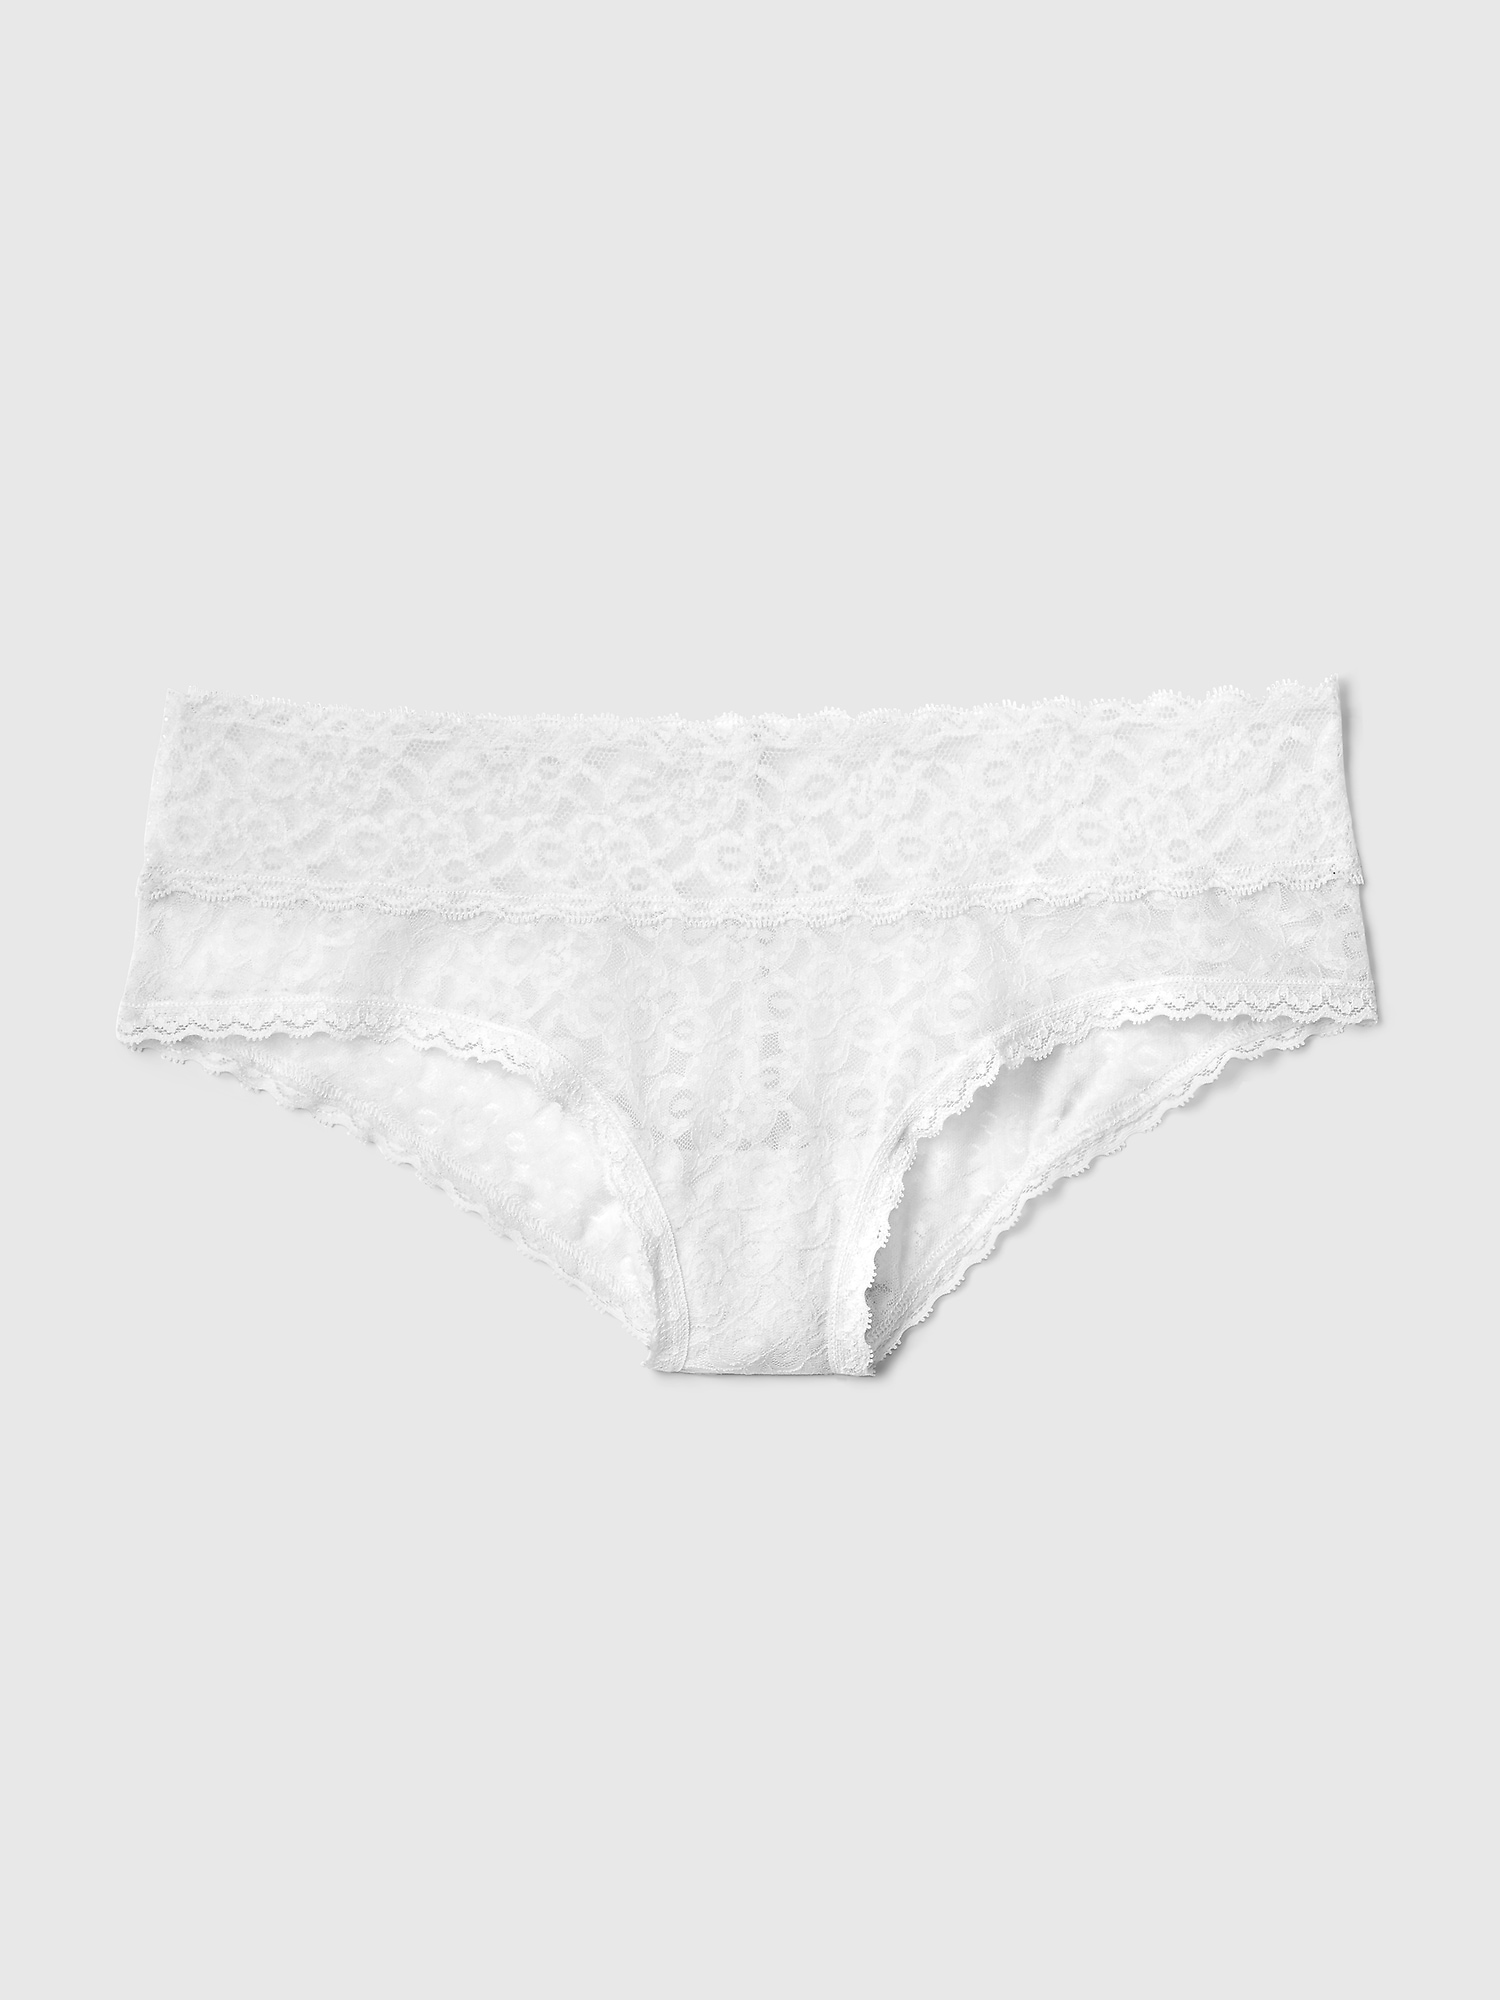 Buy Posey Lace Cheeky Panty XS, Women's Clothing, Montreal Duty Free